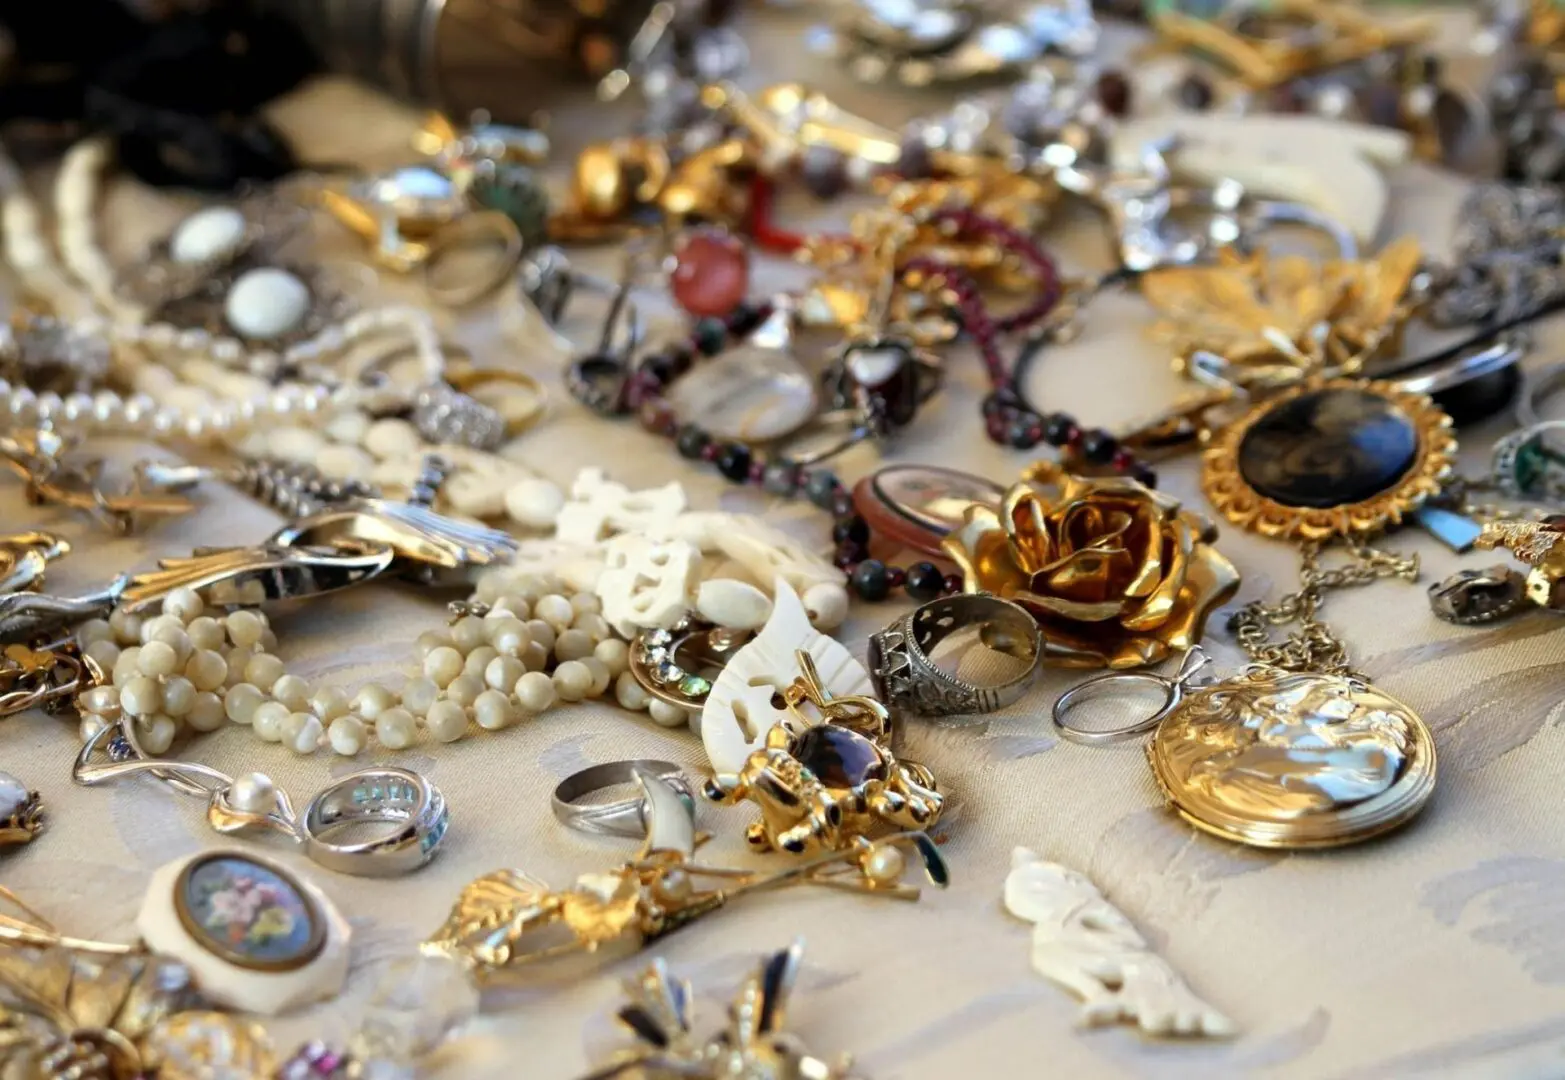 A table covered with lots of jewelry and other items.